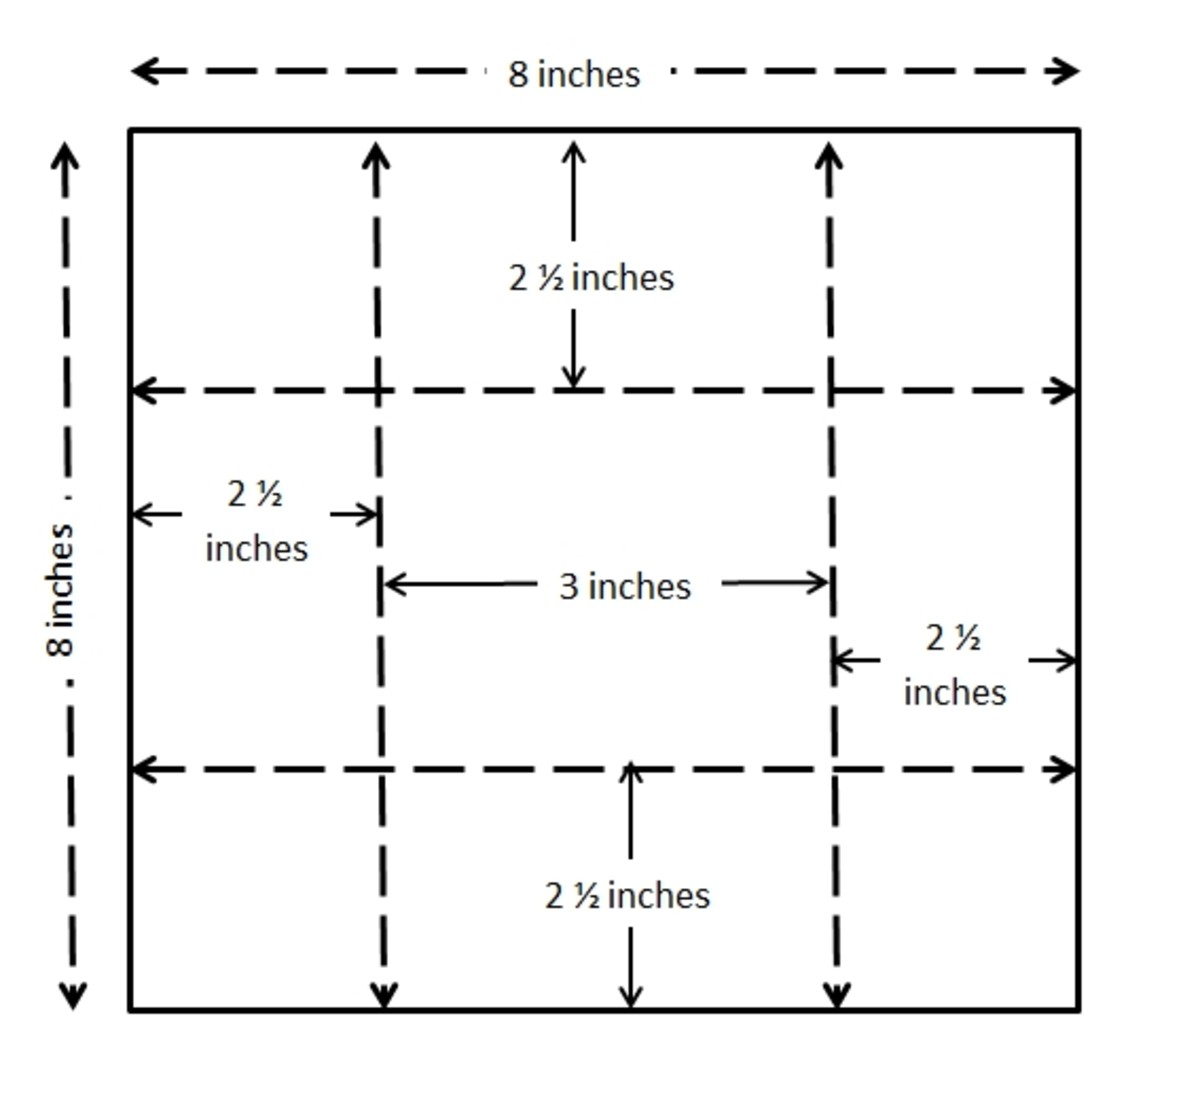 This is a diagram for marking the seams of your no-sew pincushion.